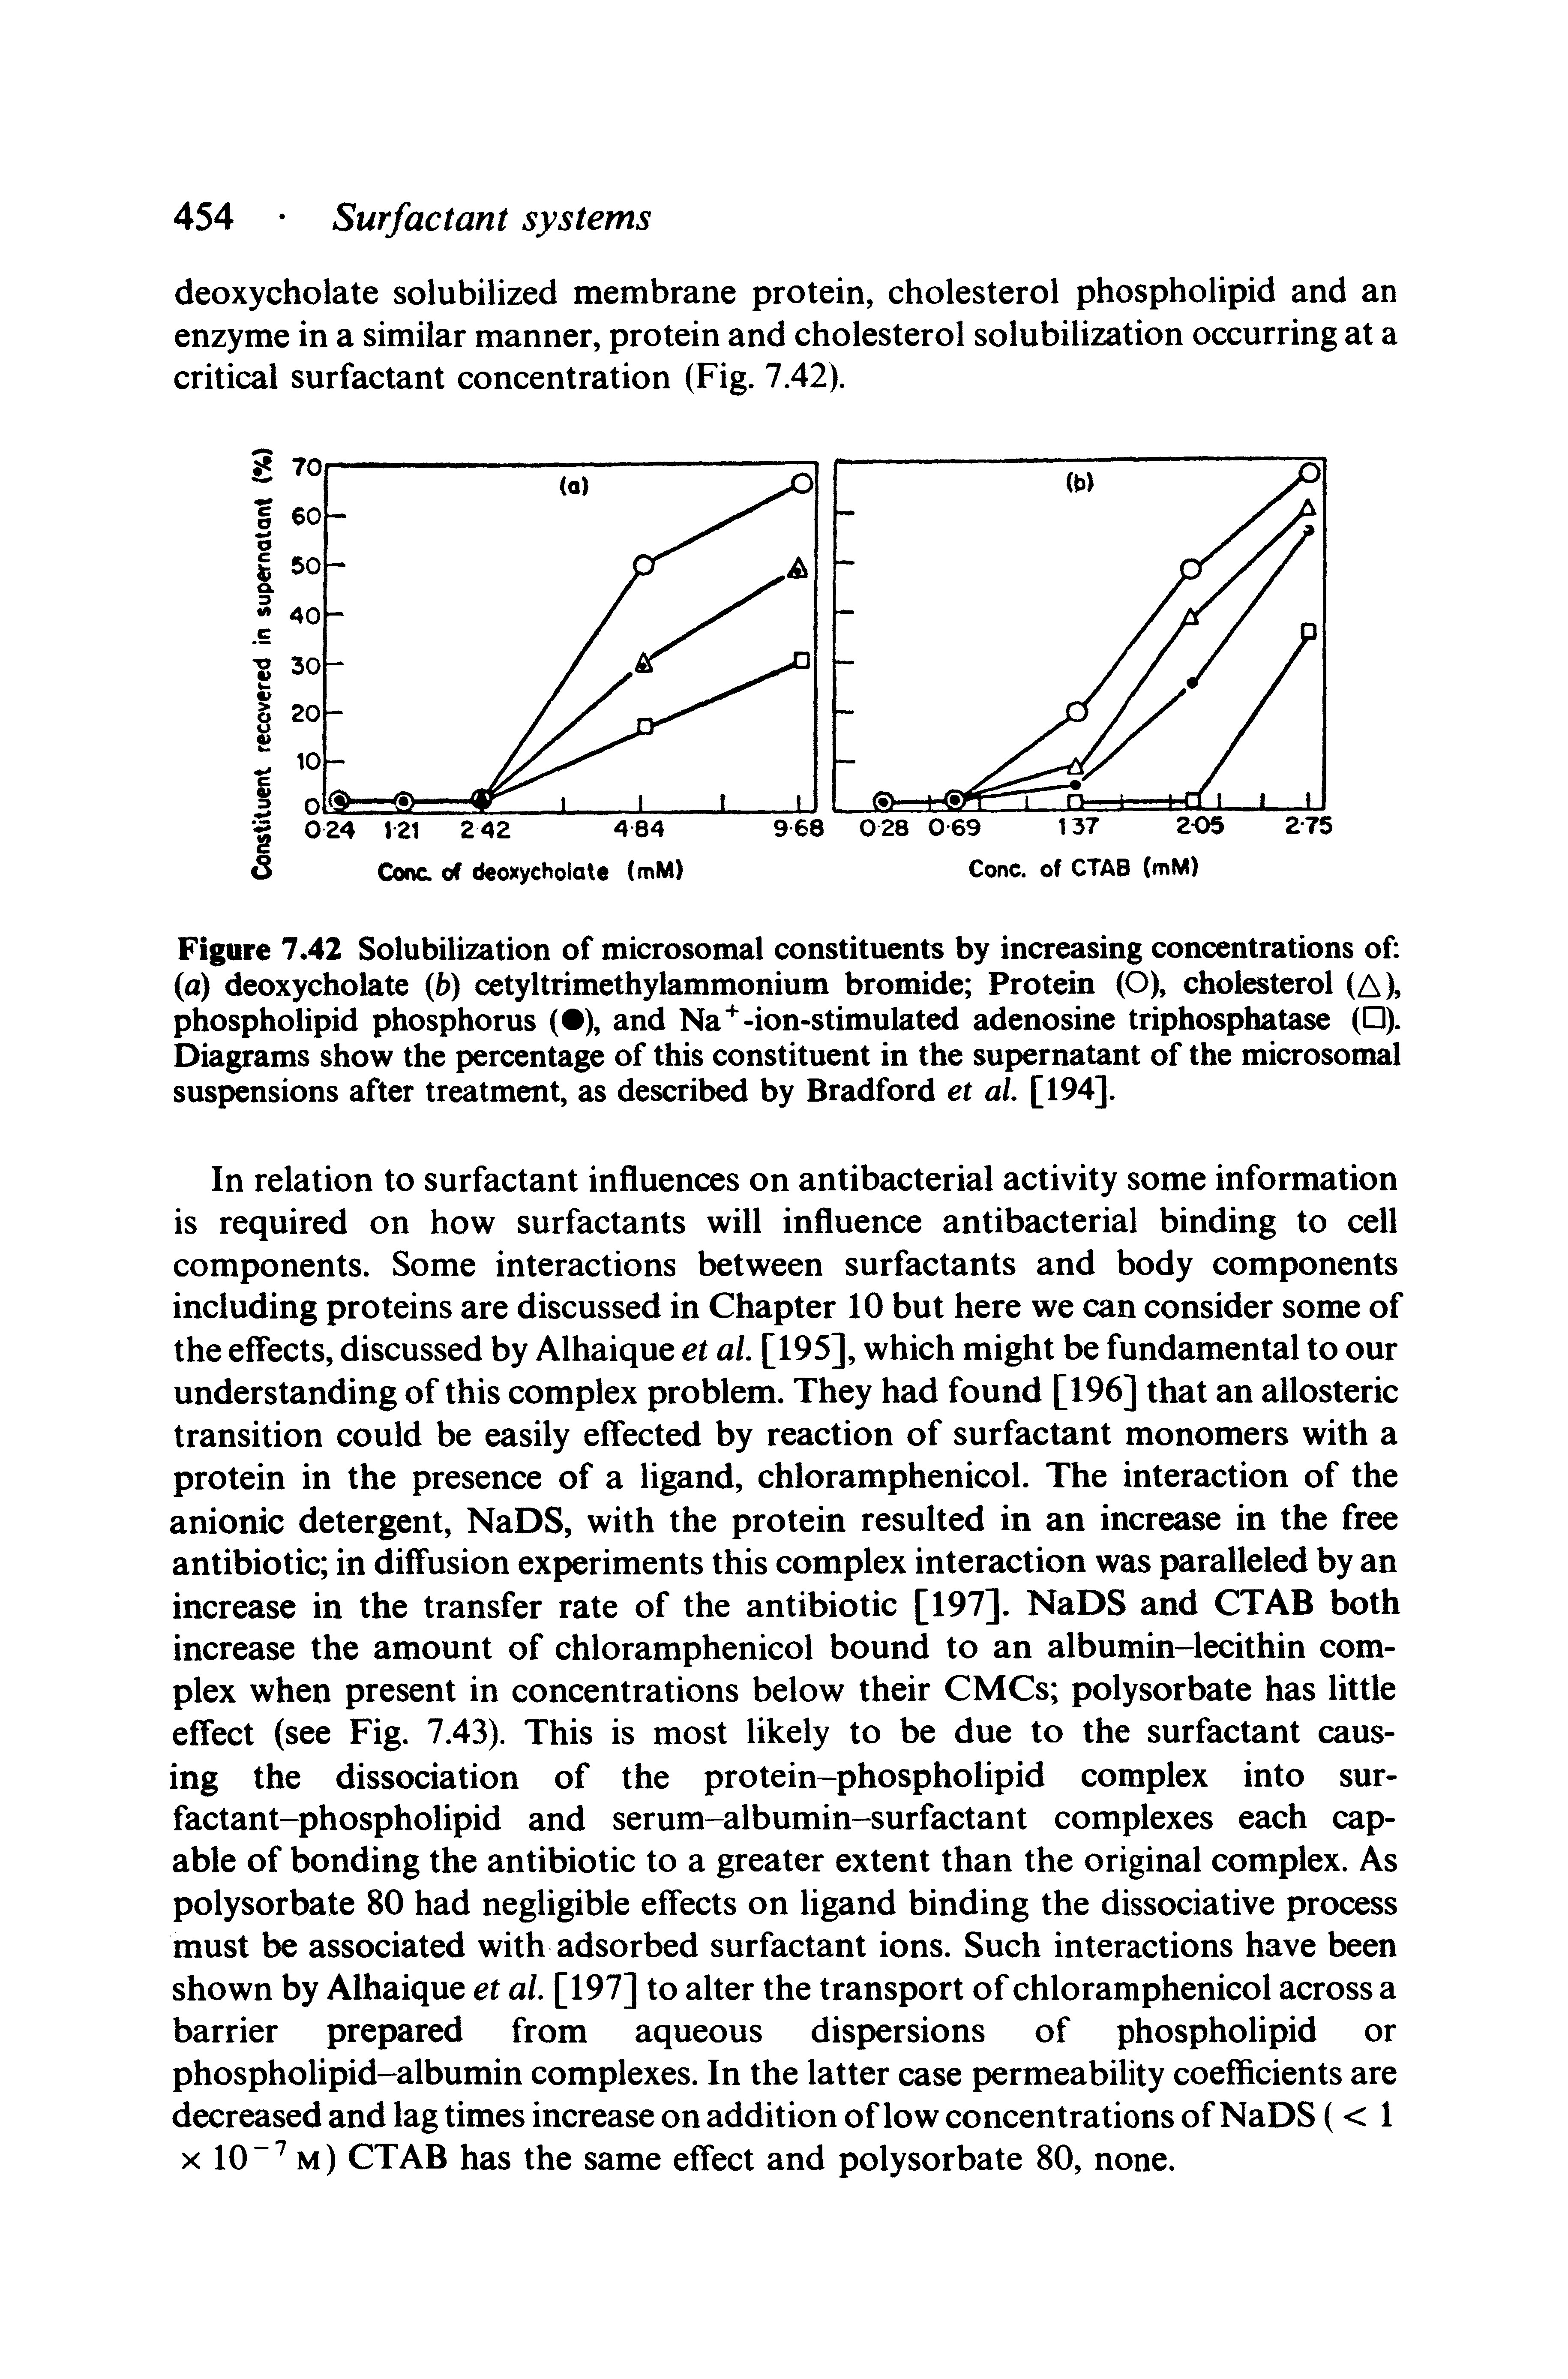 Figure 7.42 Solubilization of microsomal constituents by increasing concentrations of (a) deoxycholate (b) cetyltrimethylammonium bromide Protein (O), chol terol (A), phospholipid phosphorus ( ), and Na -ion-stimulated adenosine triphosphatase ( ). Diagrams show the percentage of this constituent in the supernatant of the microsomal suspensions after treatment, as described by Bradford et al [194].